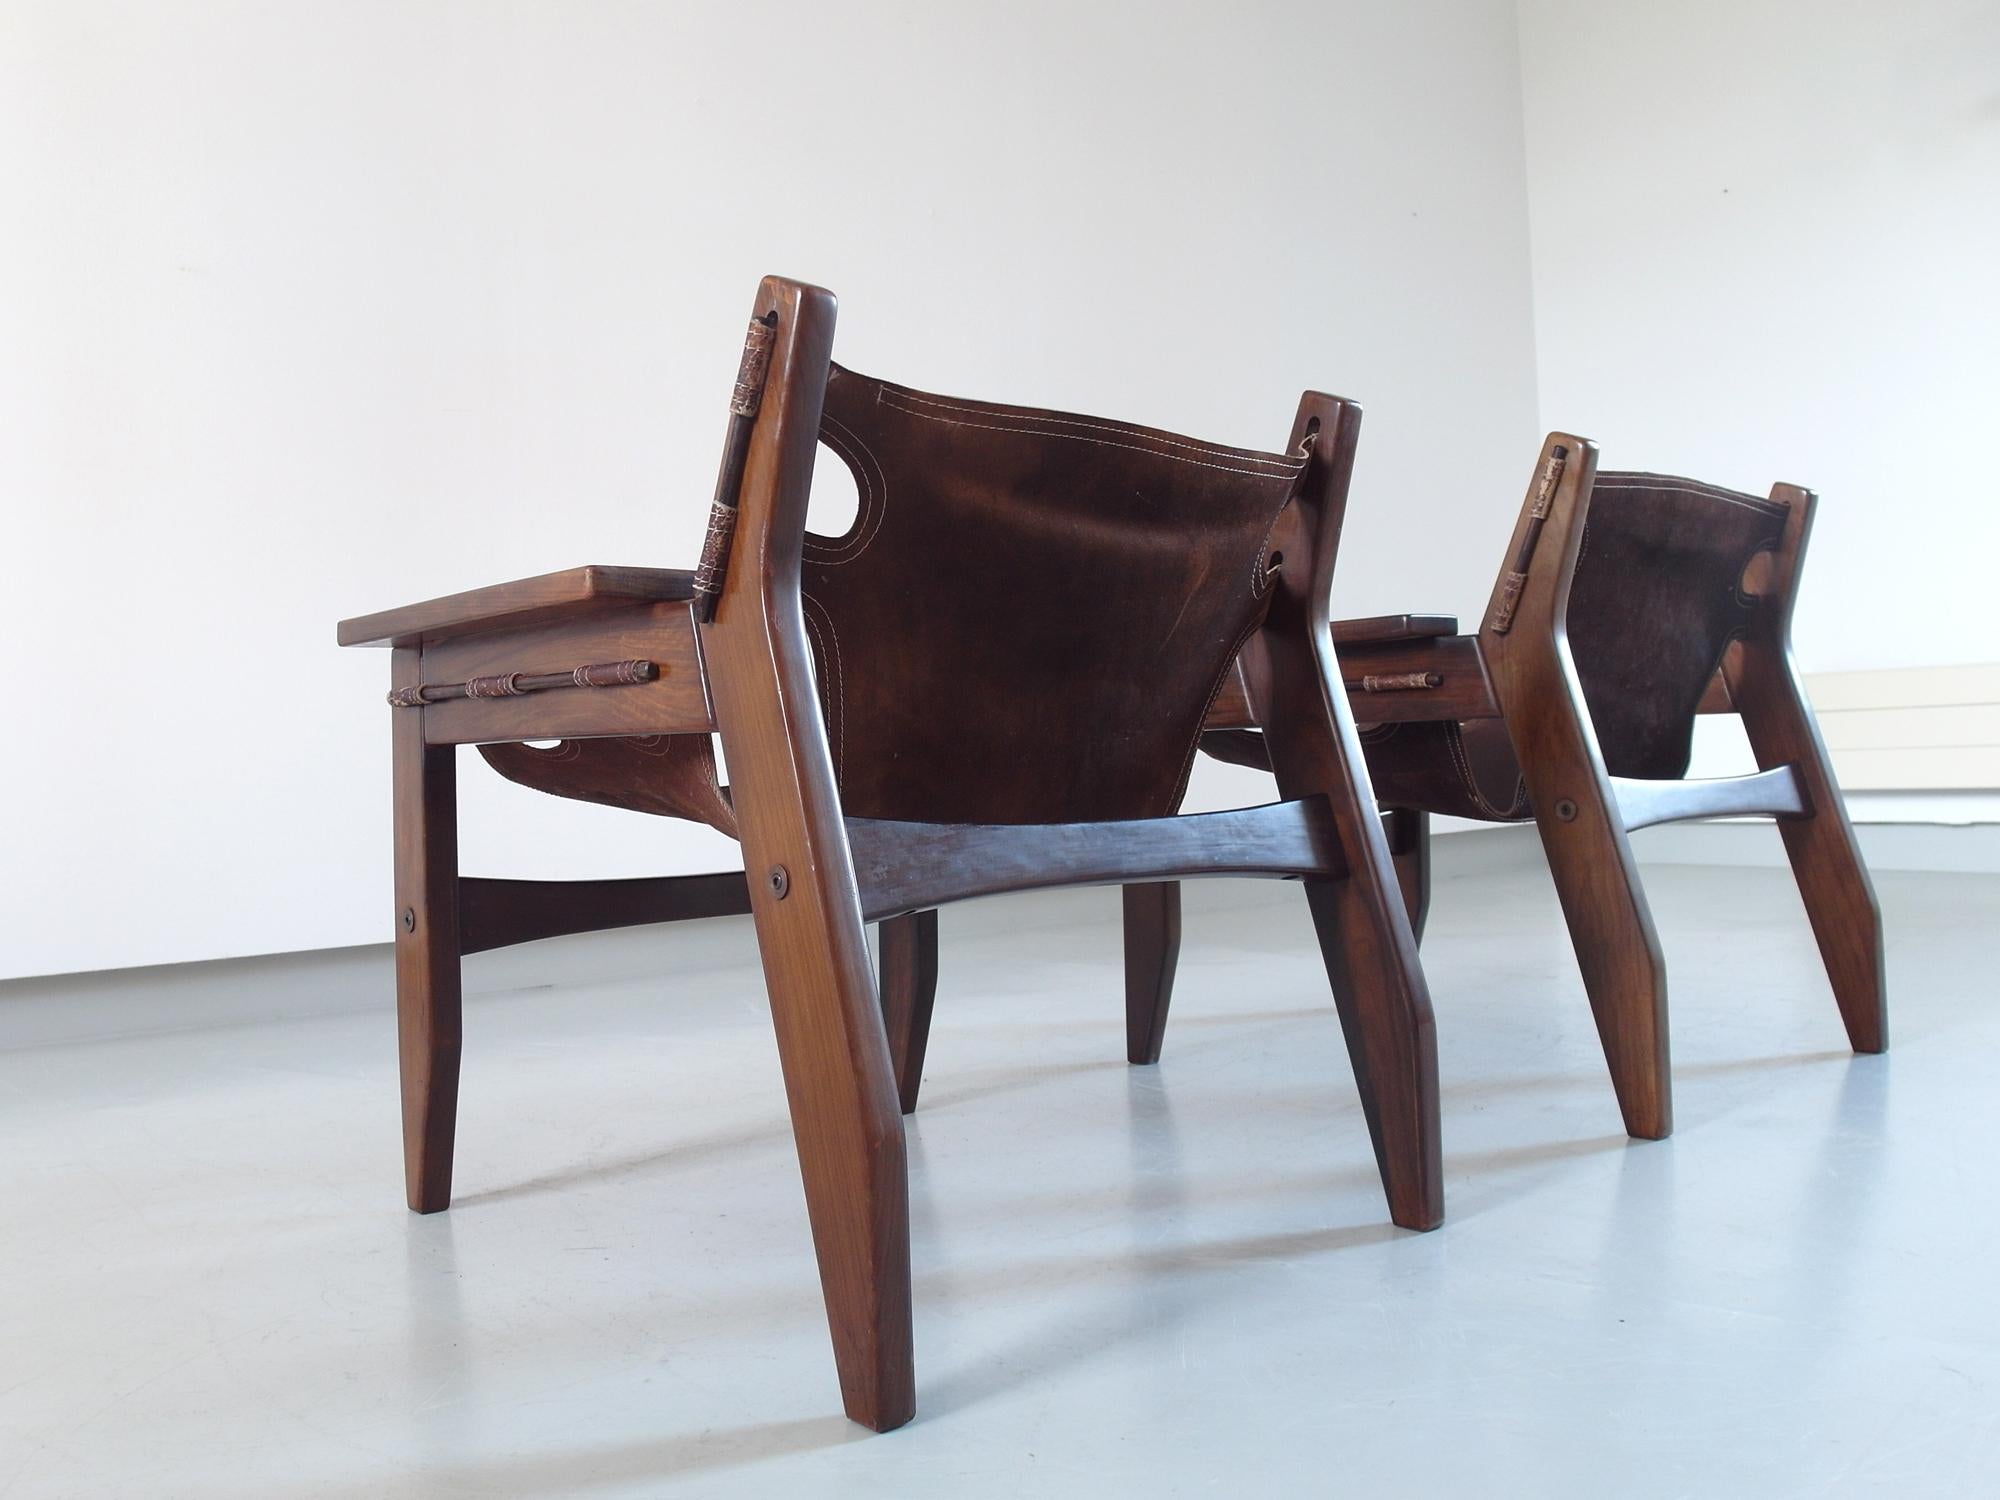 Leather Pair of Sergio Rodrigues Kilin Lounge Chairs for Oca, Brazil, 1973 For Sale